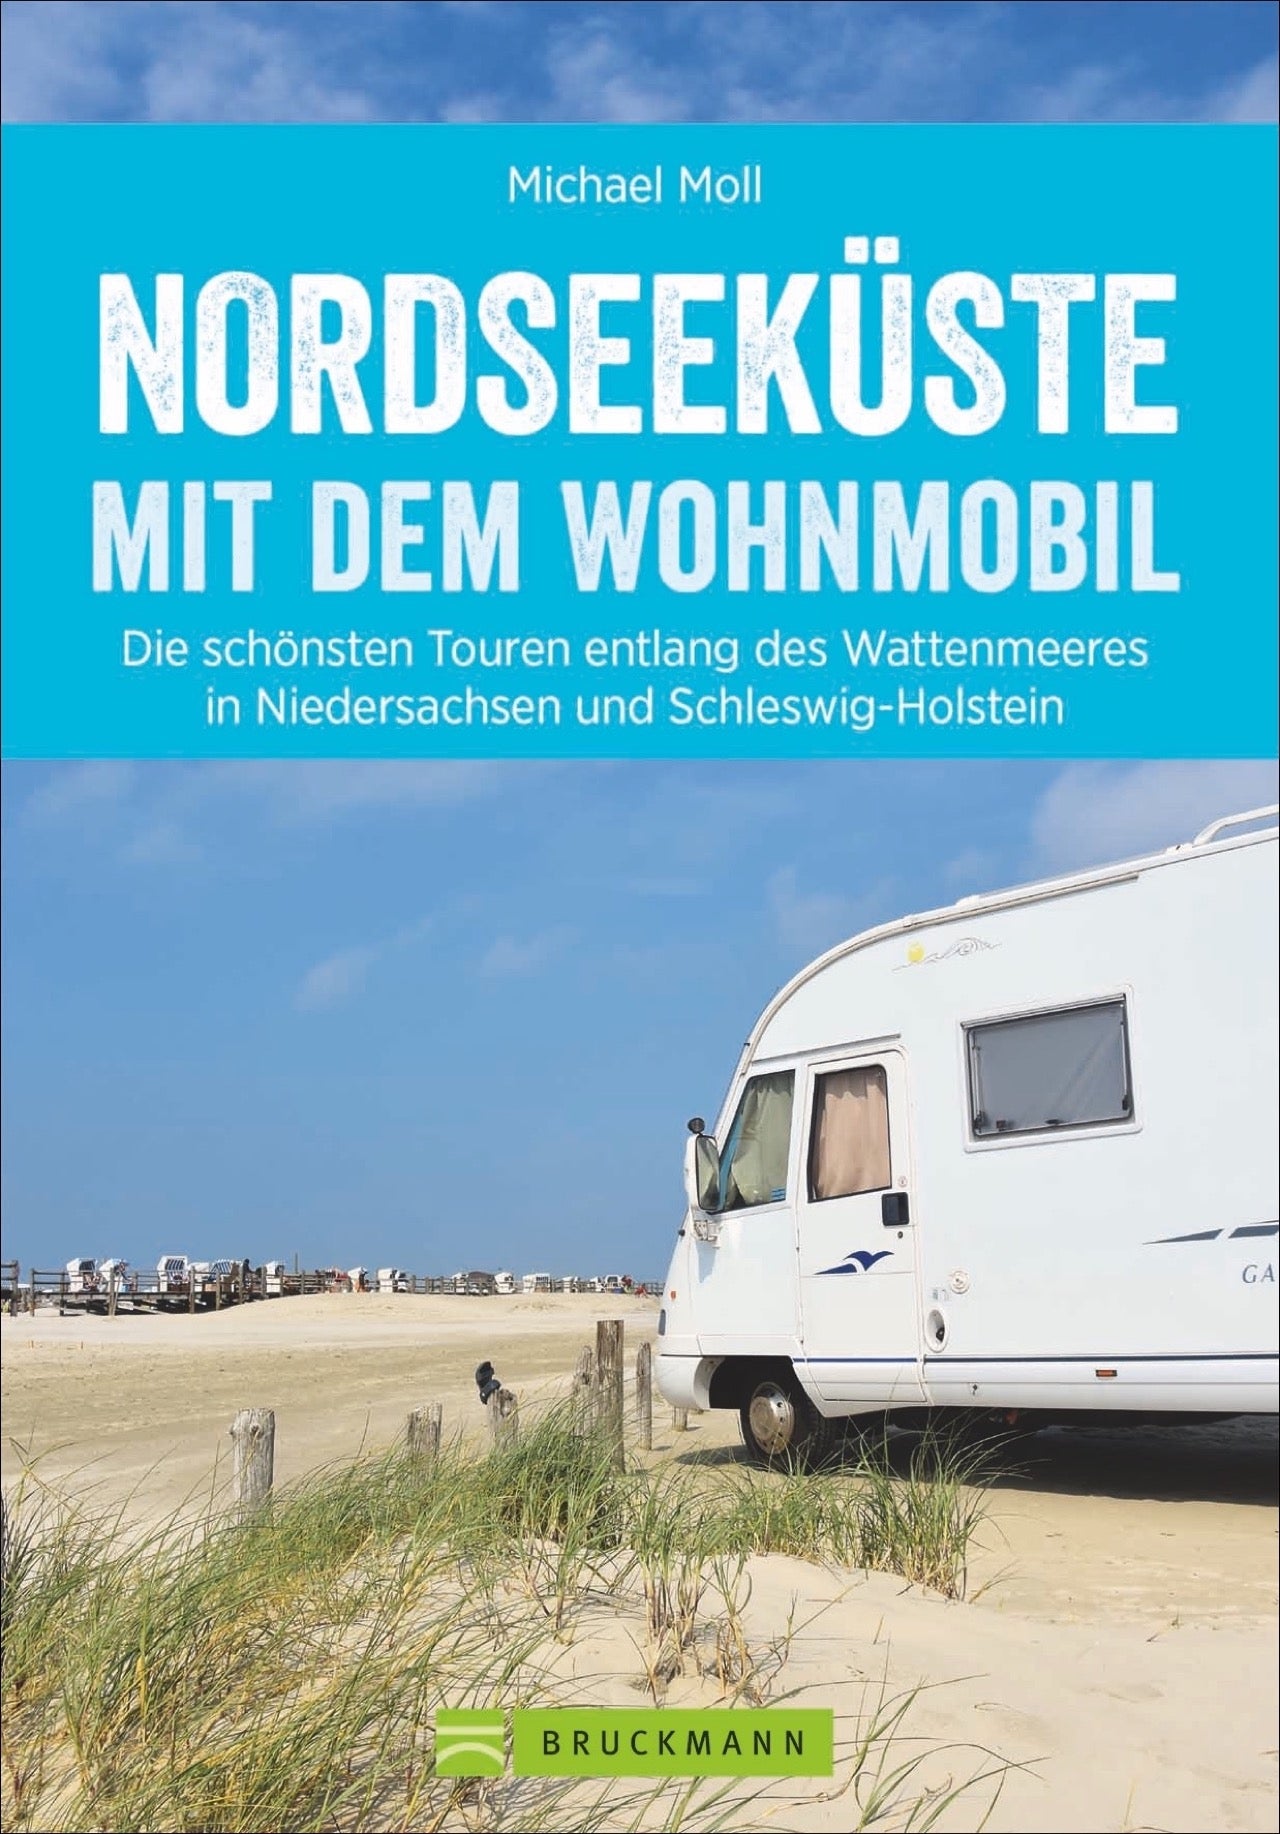 Nordseeküste with living mobility